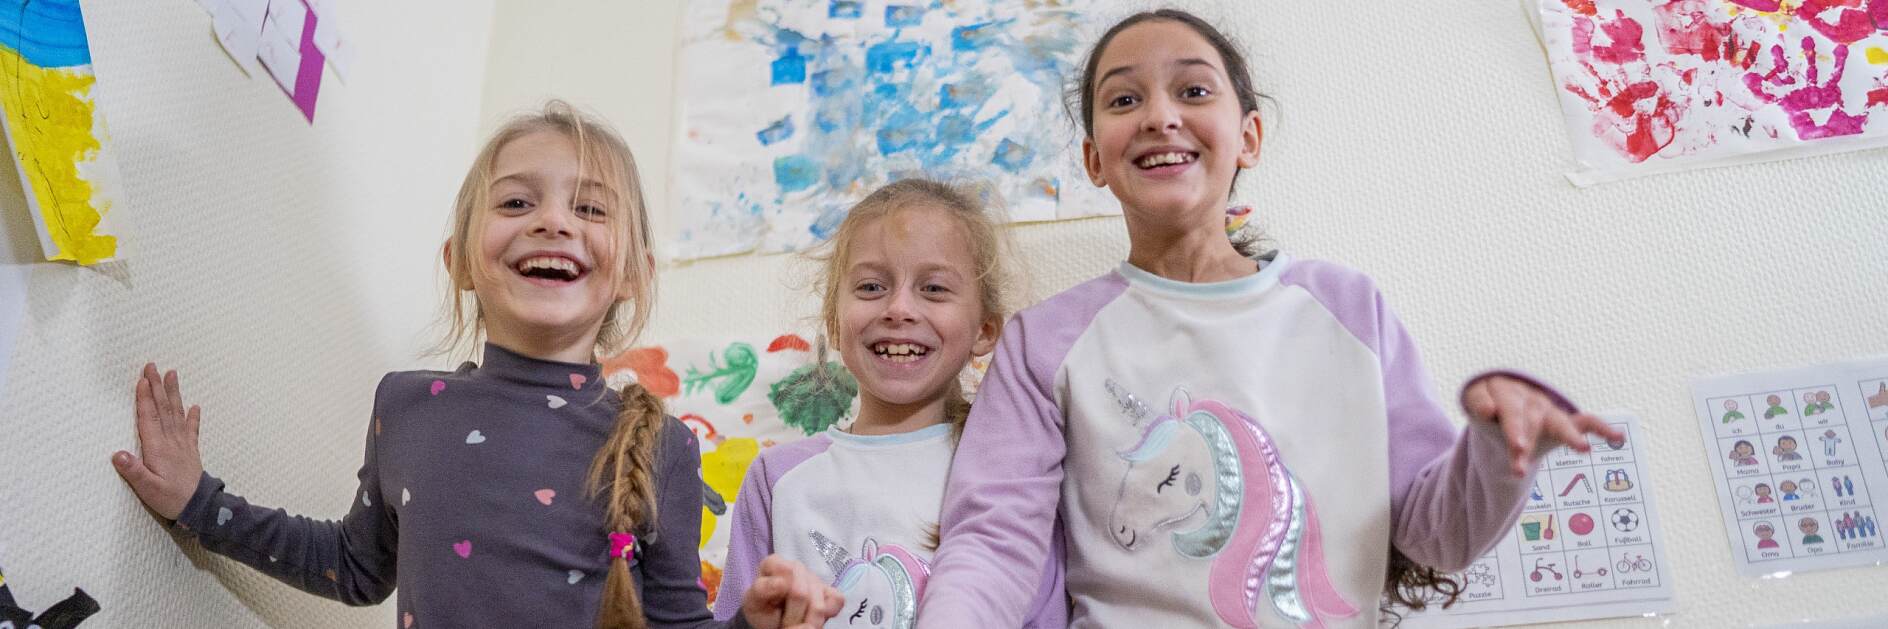 (From left to right) Larissa*, 7, Svitlana*, 7 and Daniela*, 11 smile at the camera in the Child Friendly Space located in a temporary shelter for Ukrainian refugees in Frankfurt, Germany.